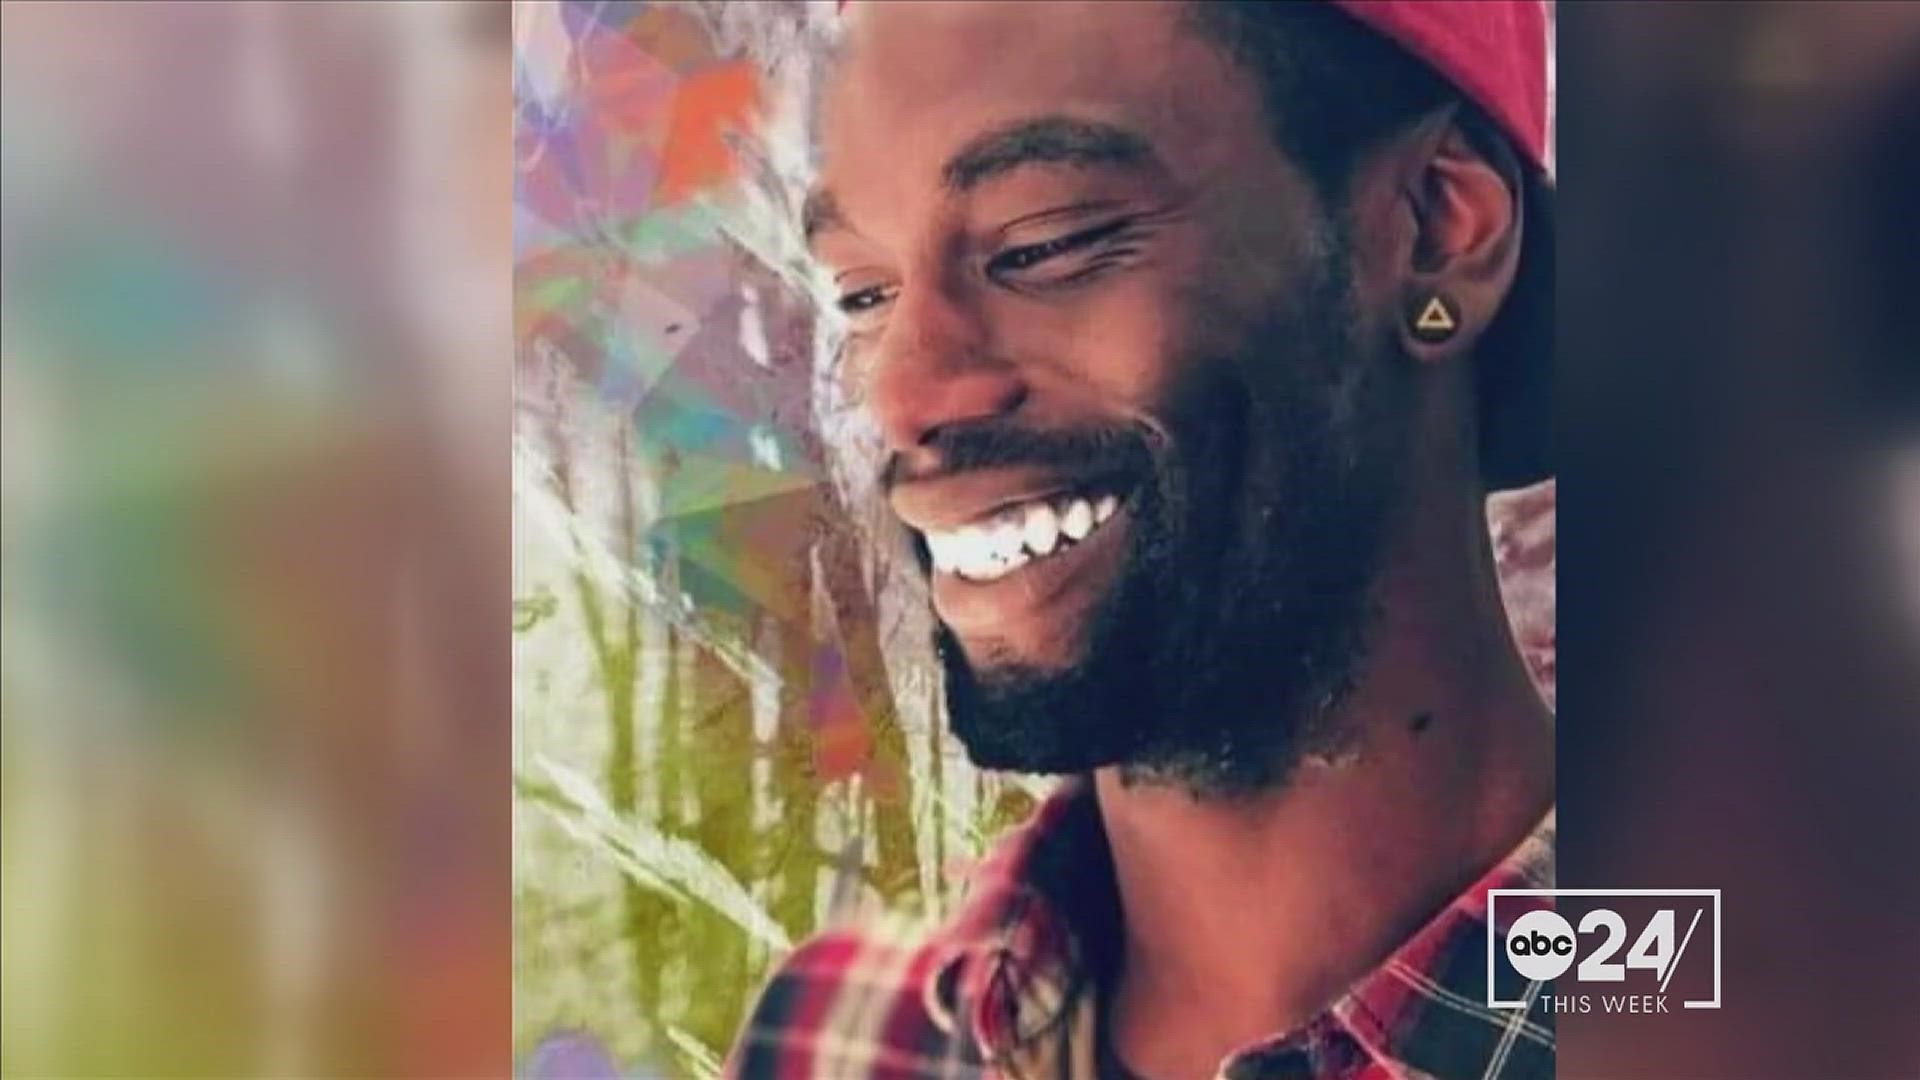 Otis Sanford questions "what kind of bias" lead to officers targeting 29-year-old Tyre Nichols — a skateboarder, a FedEx employee and an accomplished photographer.